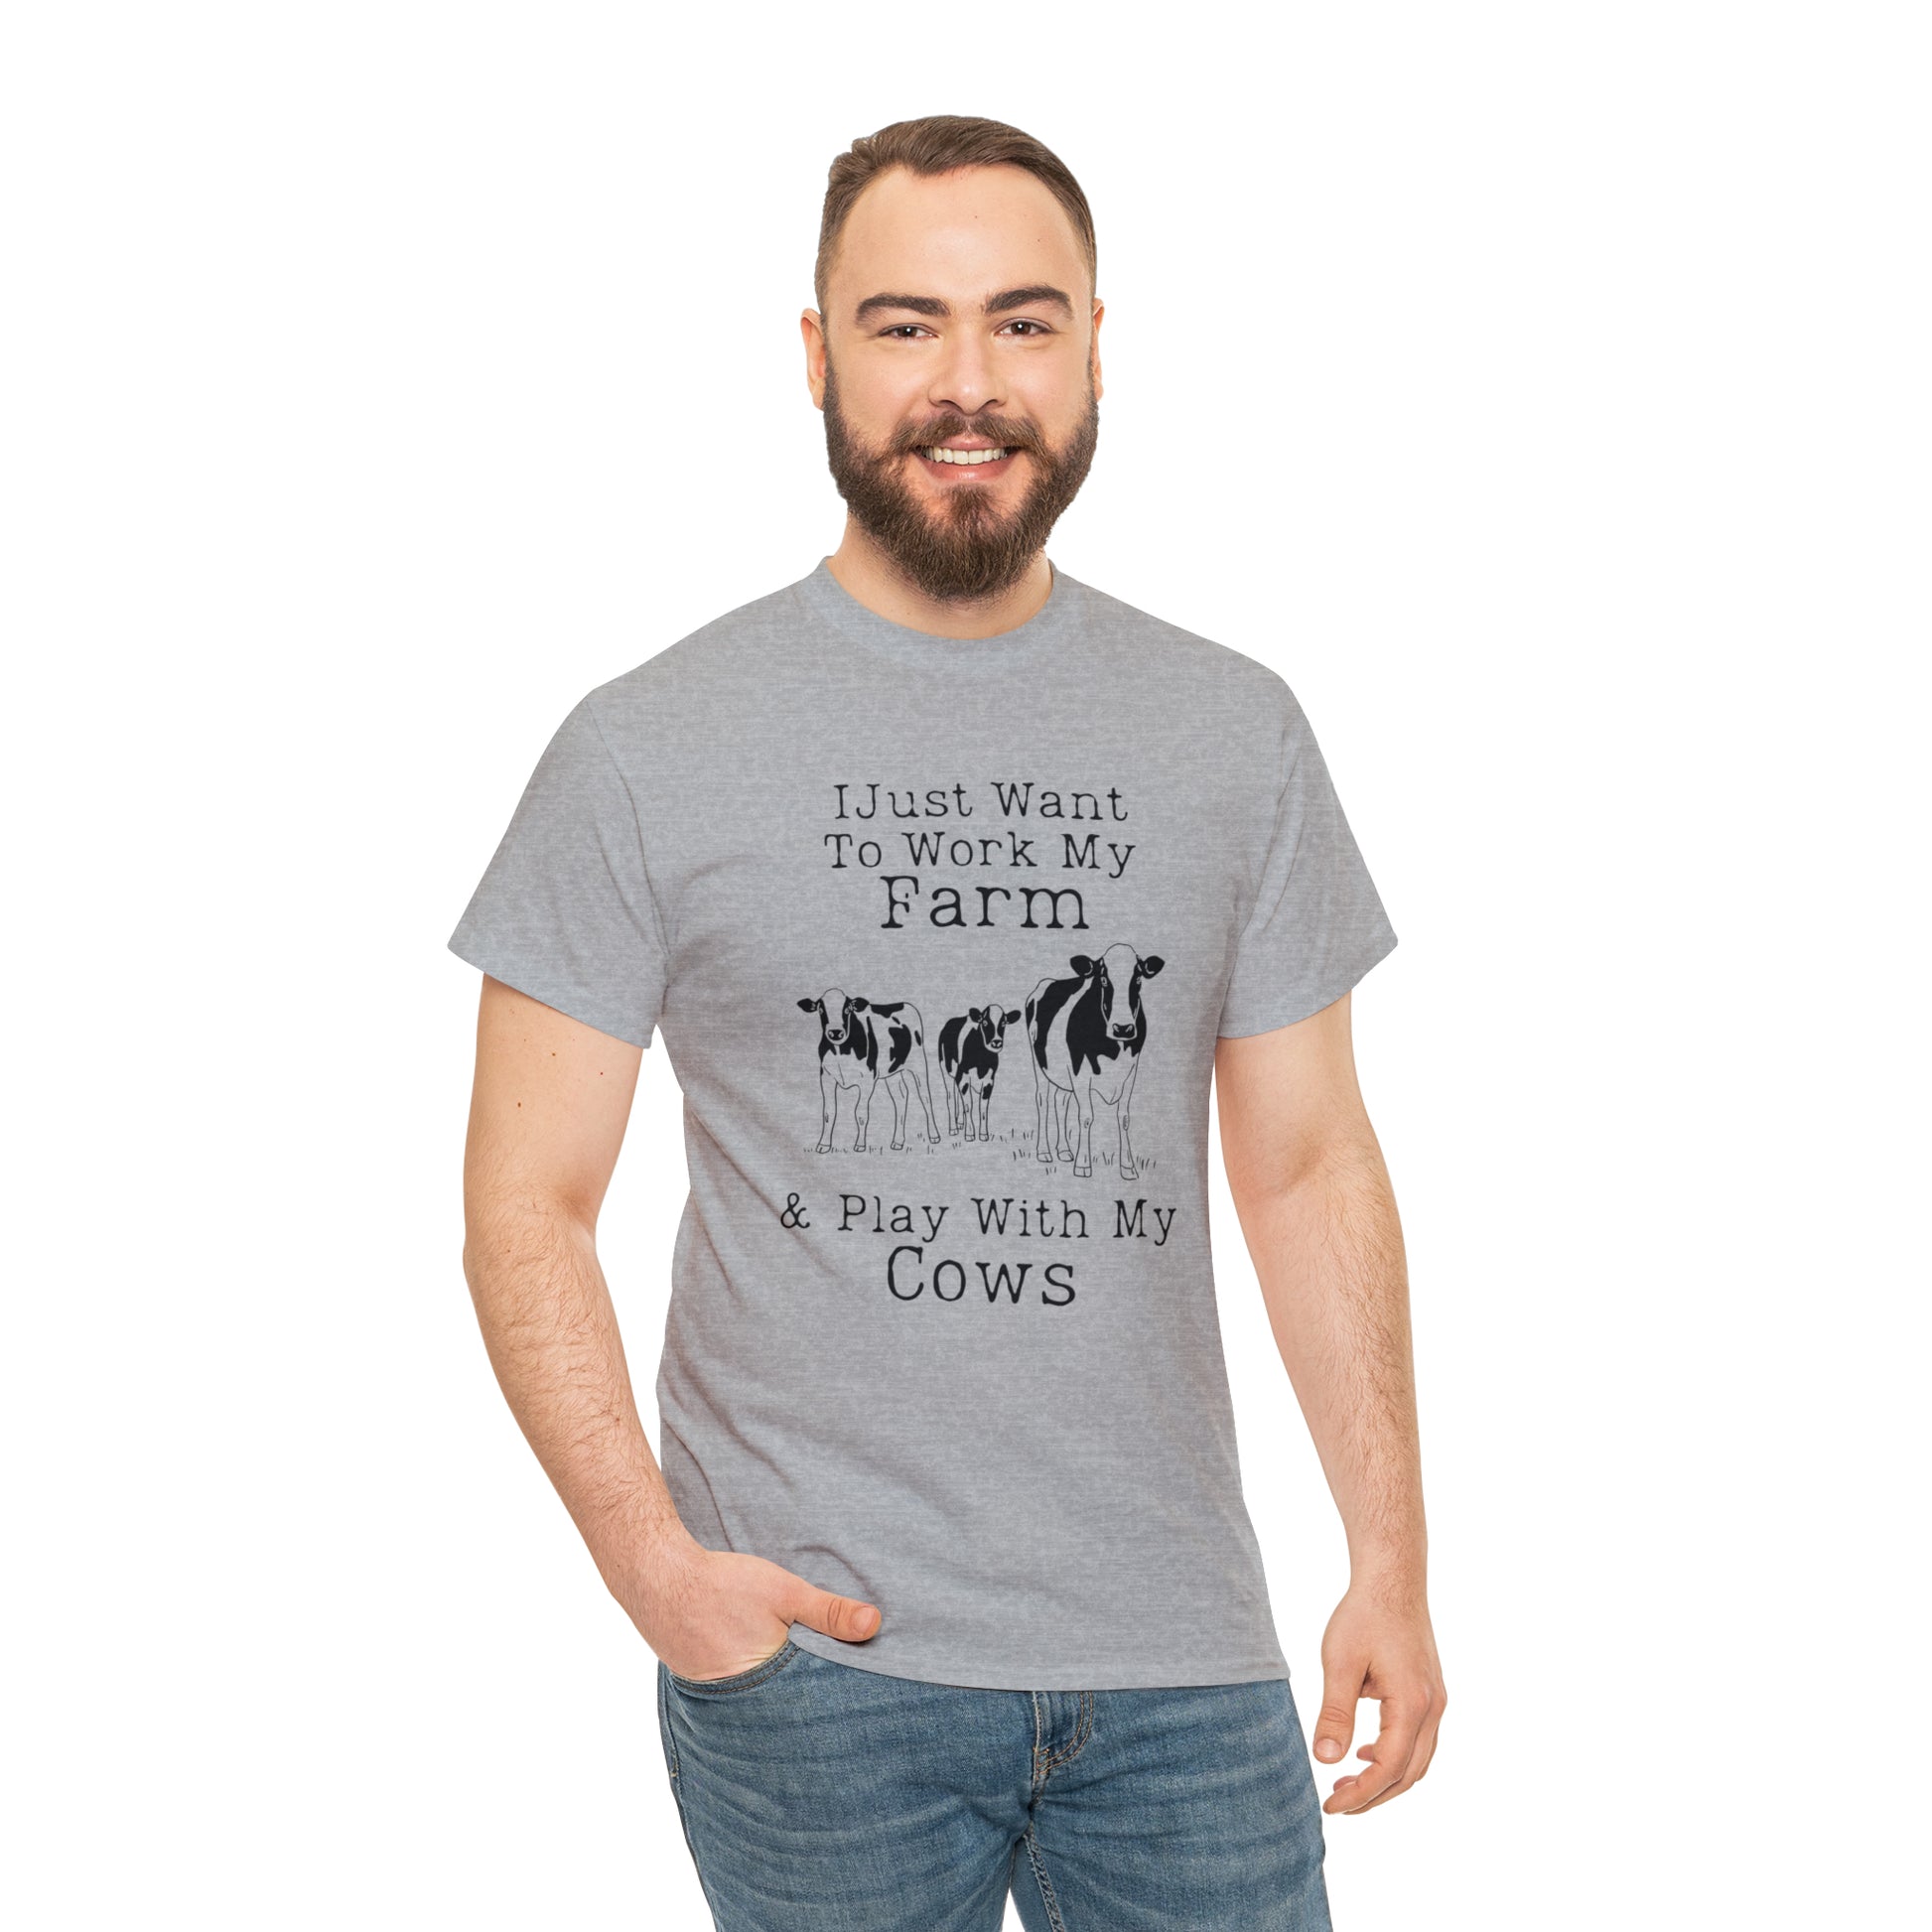 "I Just Want To Work My Farm & Play With Cows" T-Shirt - Weave Got Gifts - Unique Gifts You Won’t Find Anywhere Else!